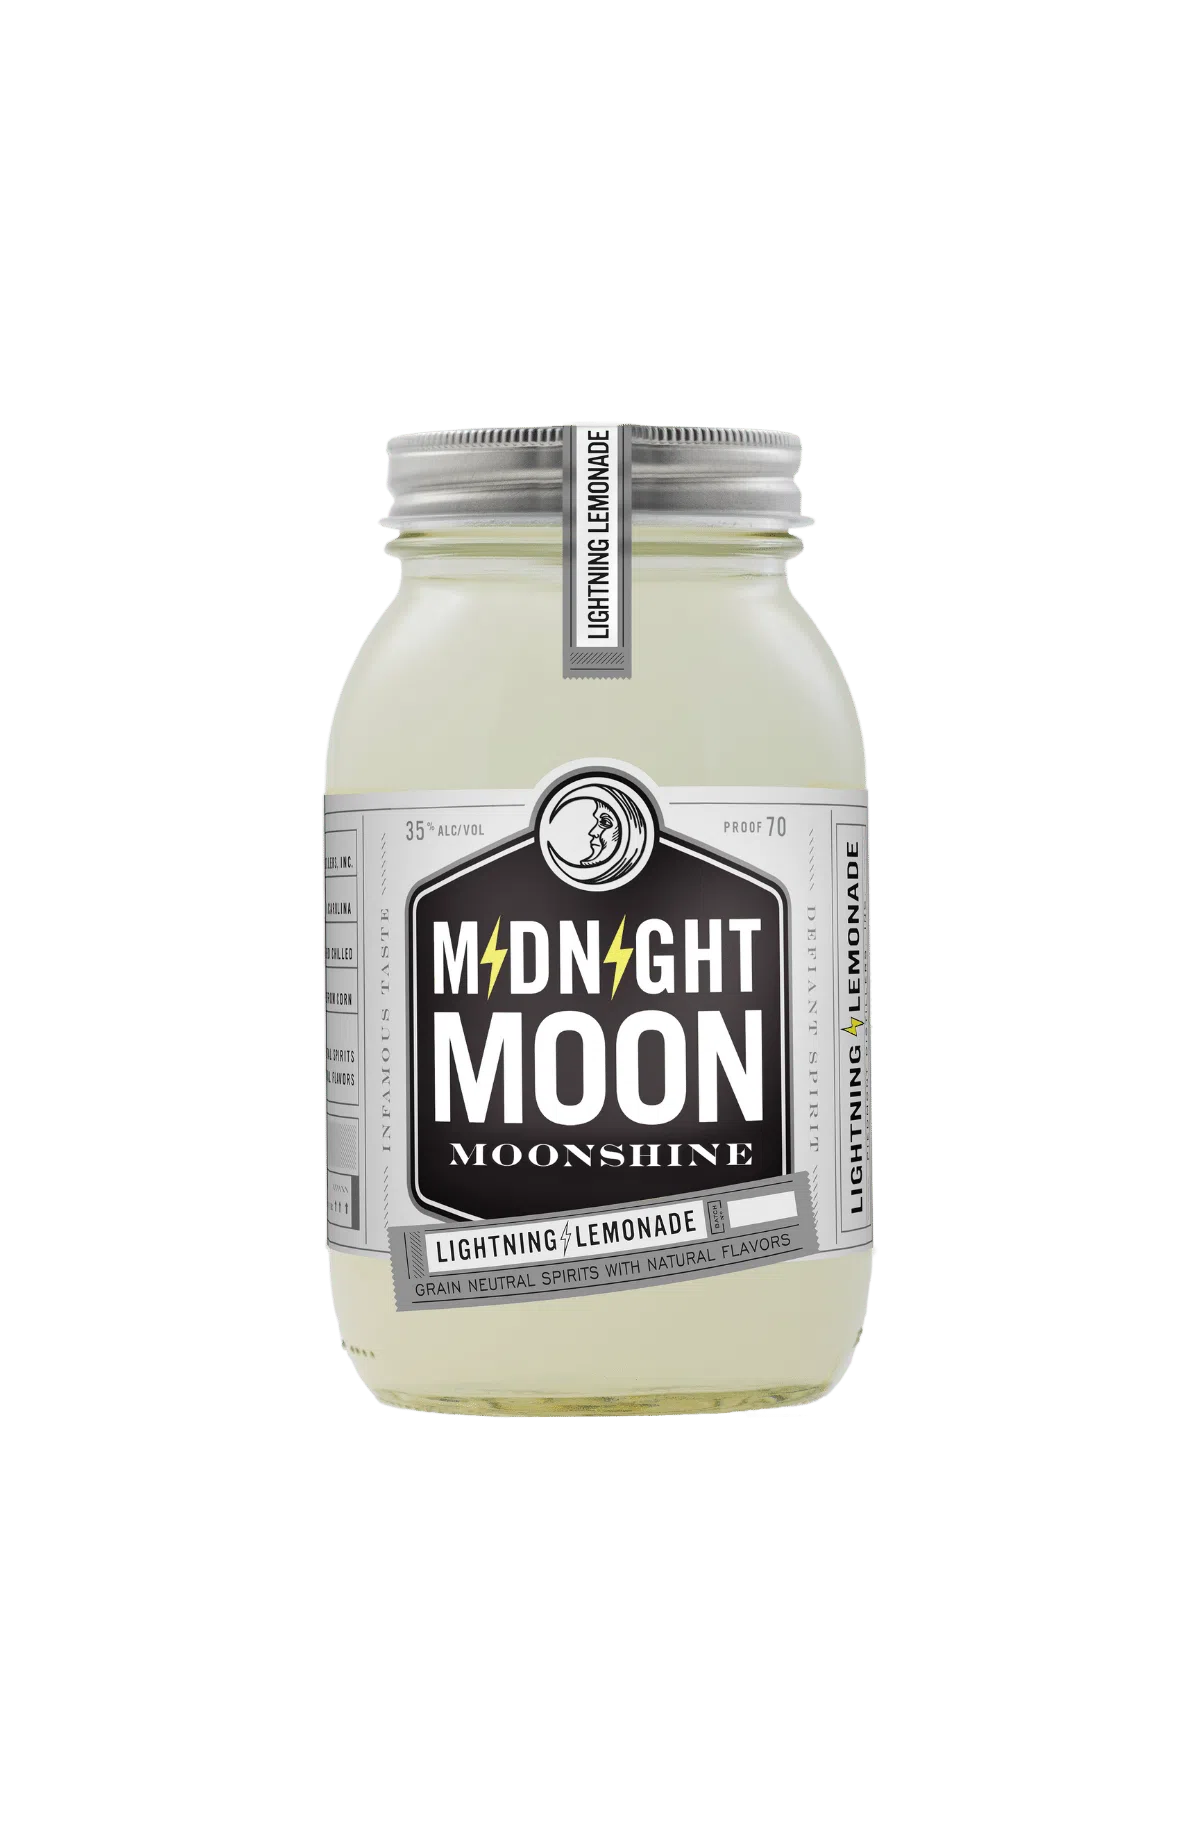 Midnight Moon Lightning Lemonade 750mL a clear glass mason jar with a white label and silver top